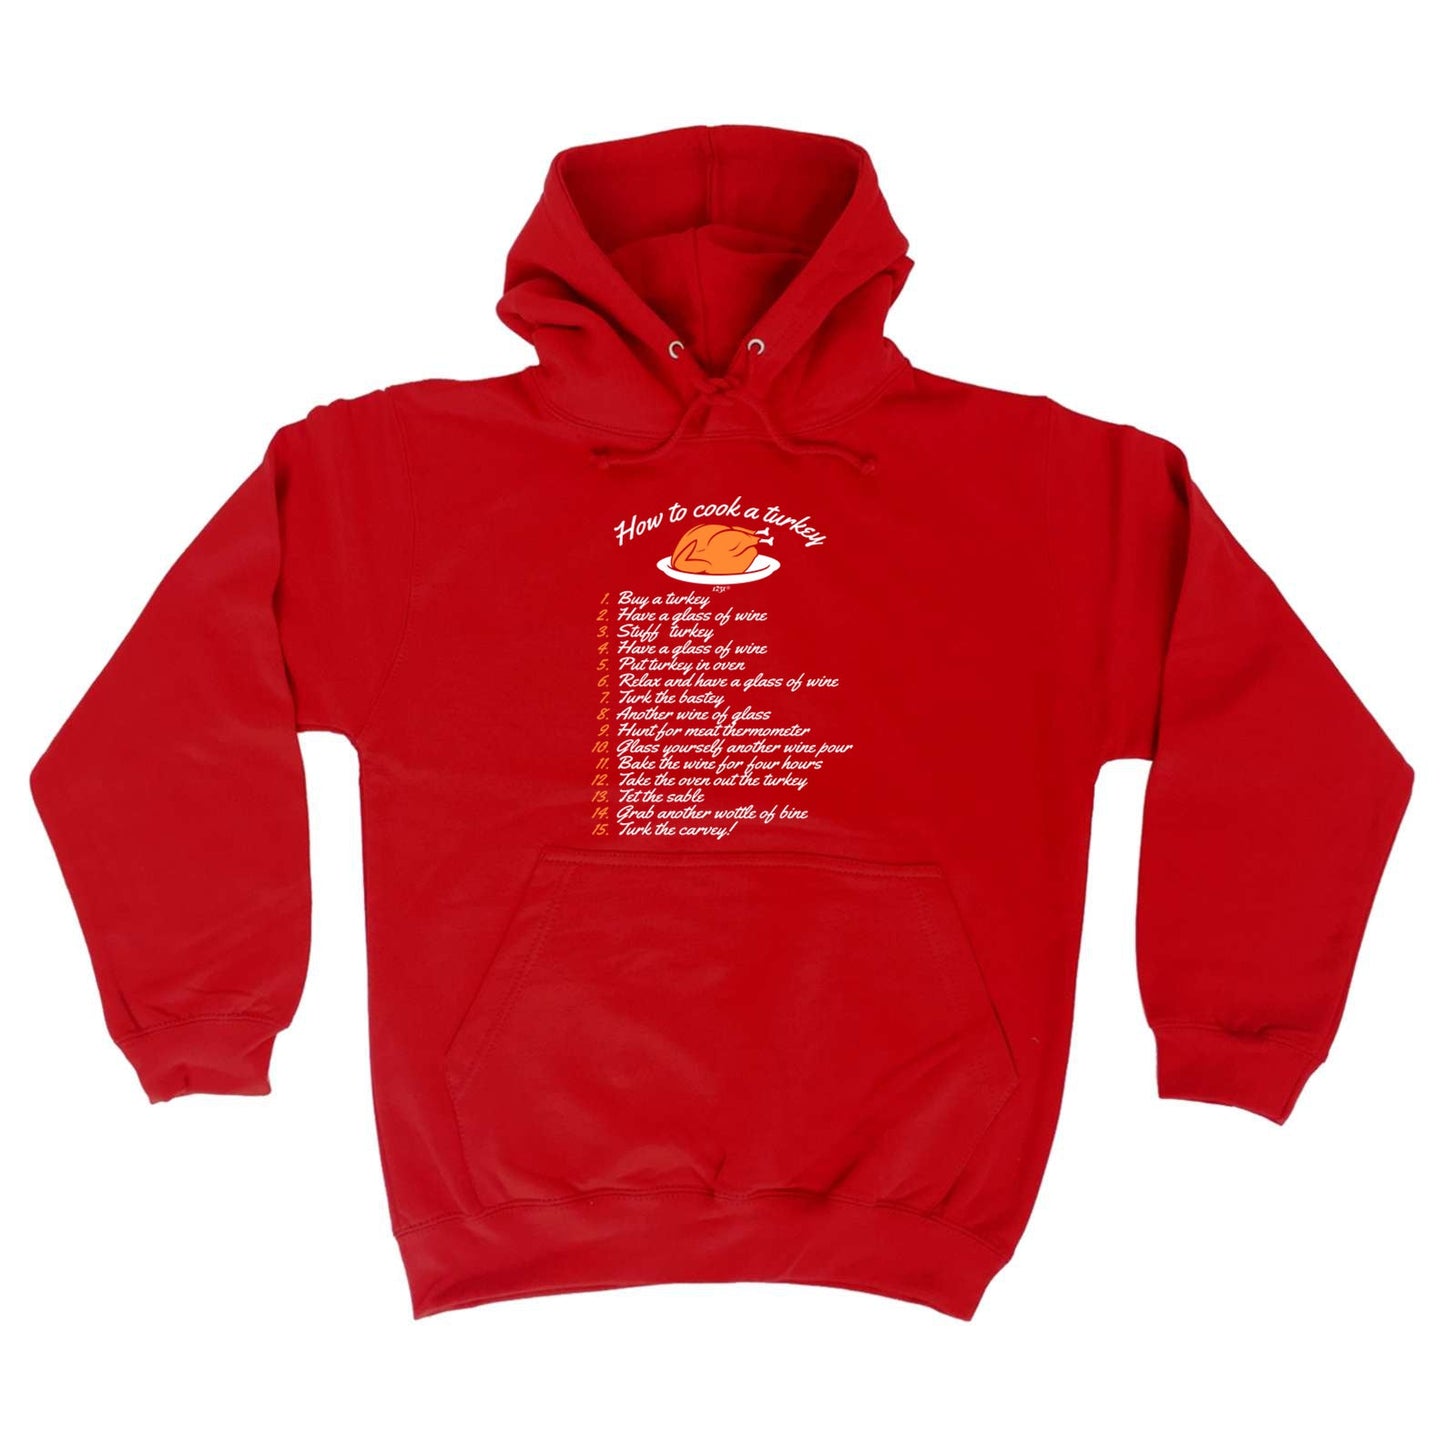 How To Cook A Turkey Christmas - Xmas Novelty Hoodies Hoodie